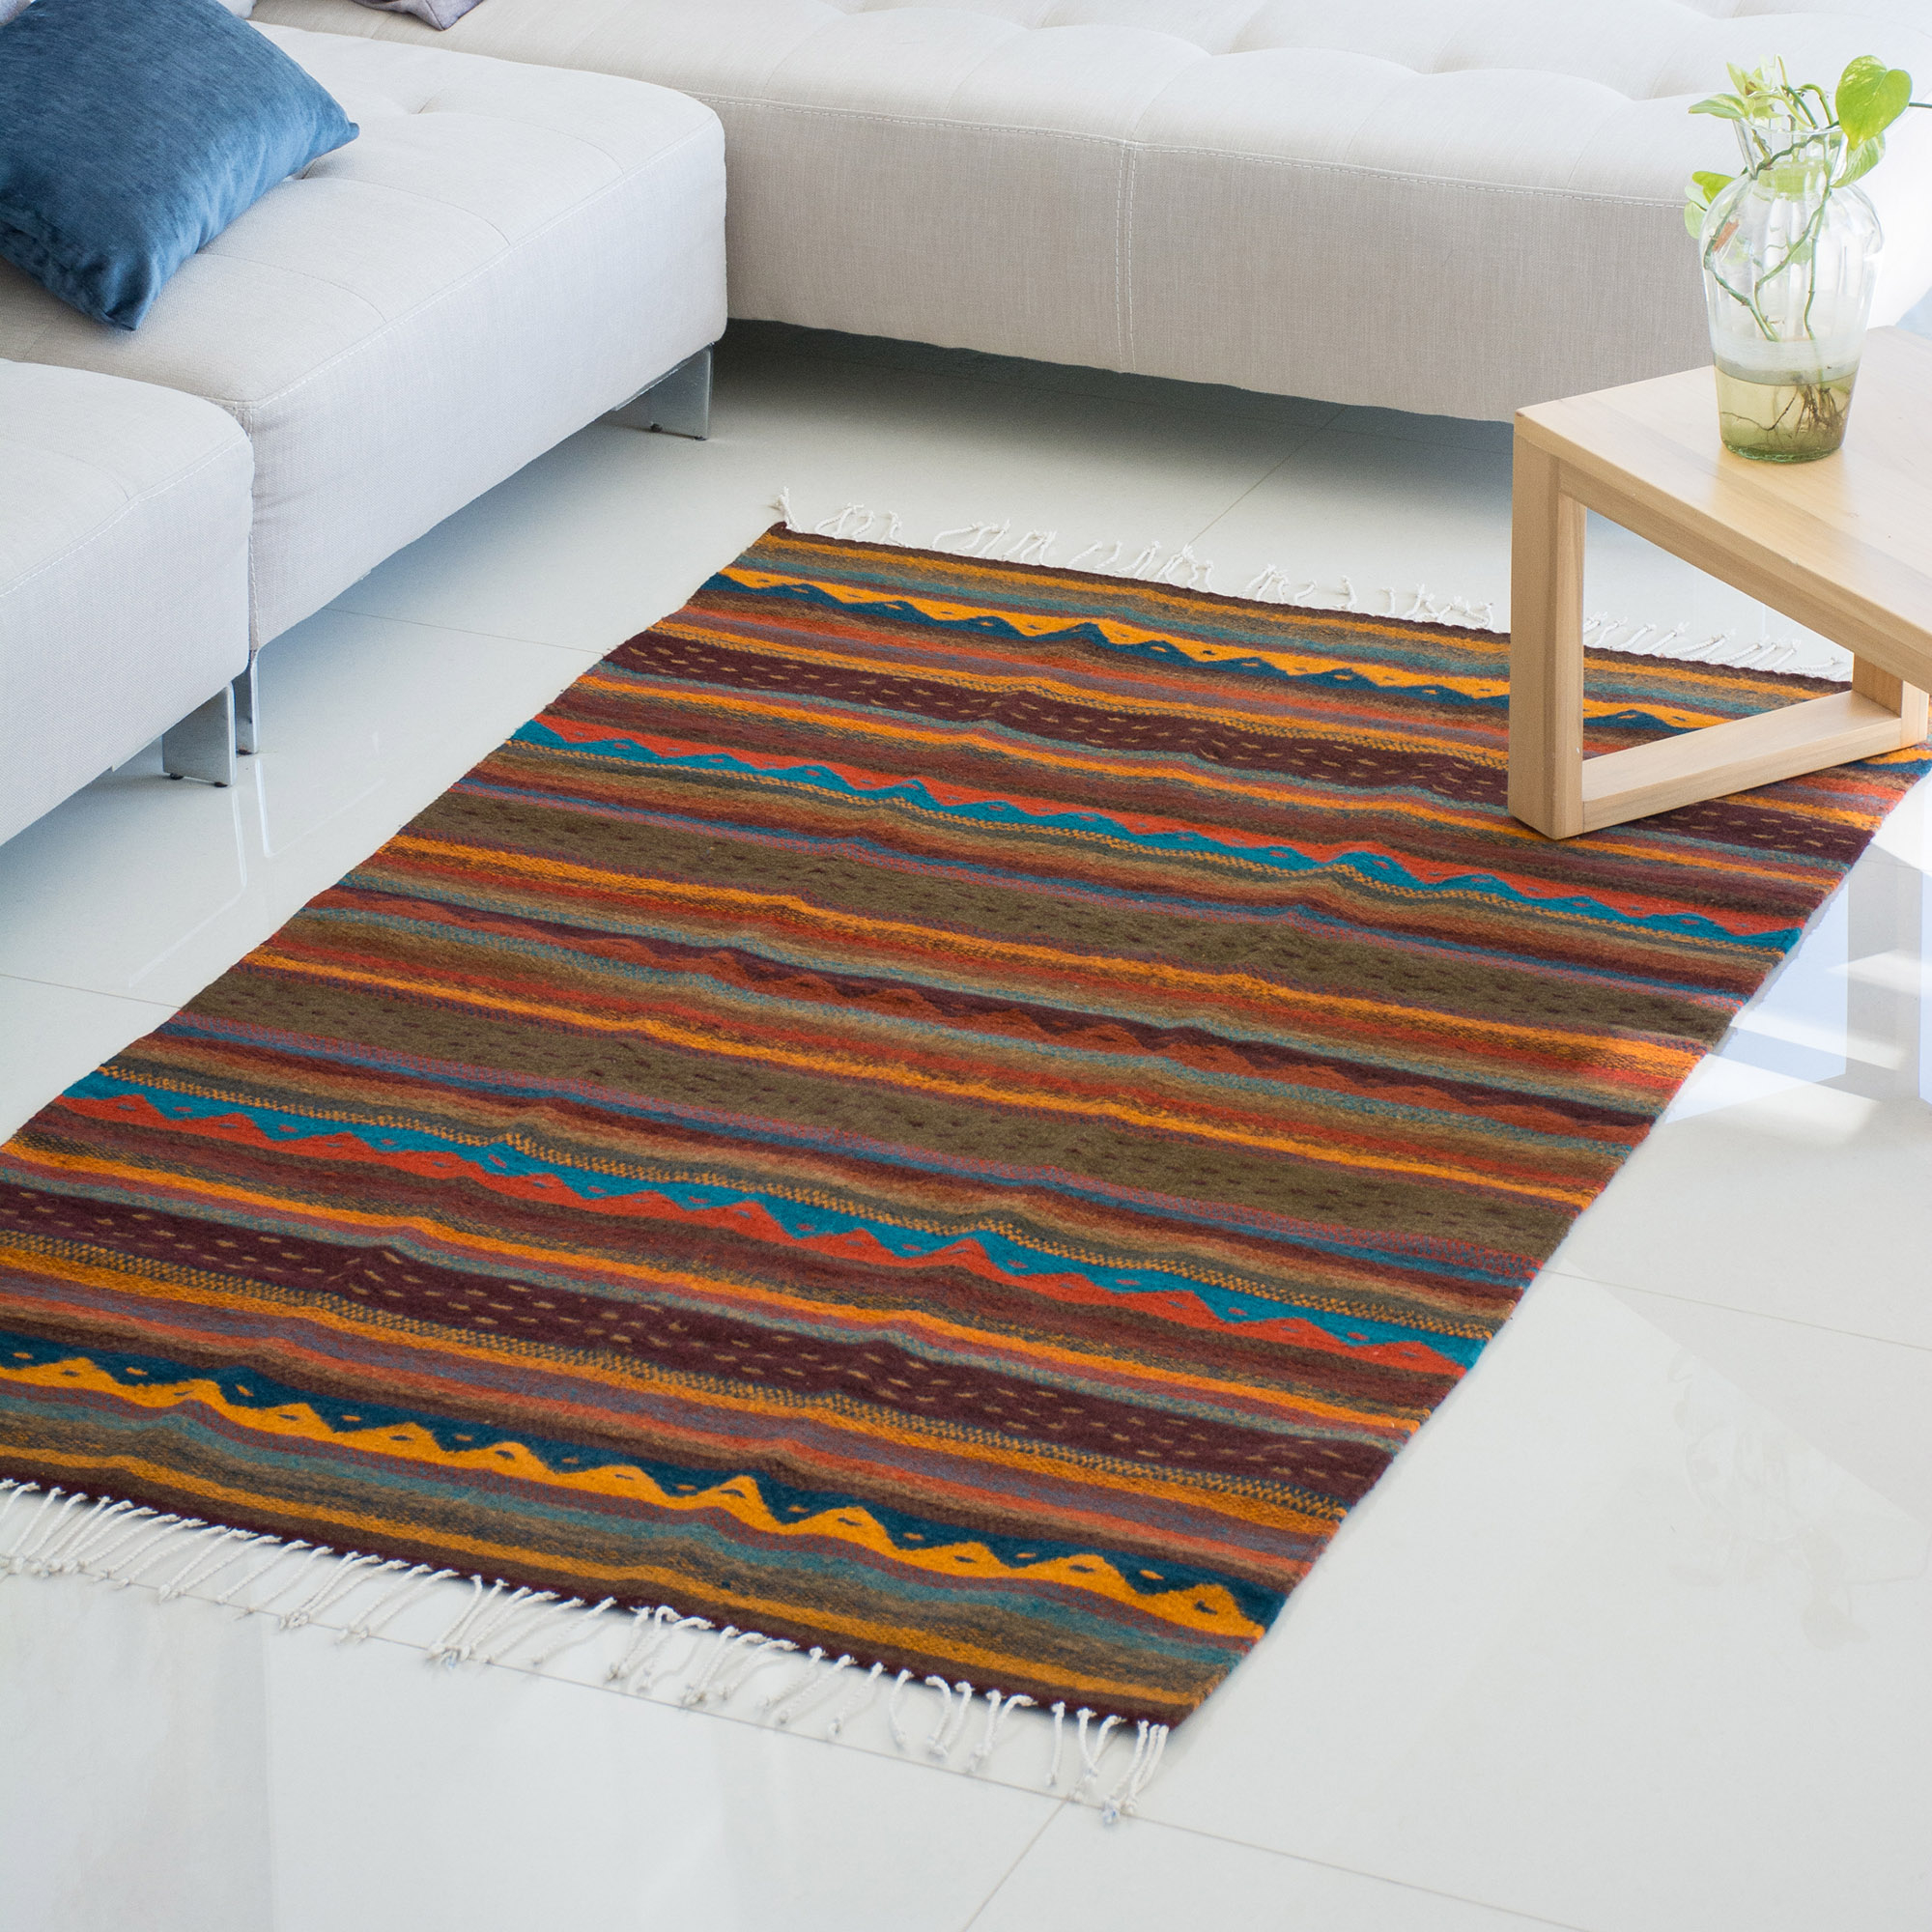 Zapotec Area Rug From Mexico 4x6, Earth Tone Area Rugs